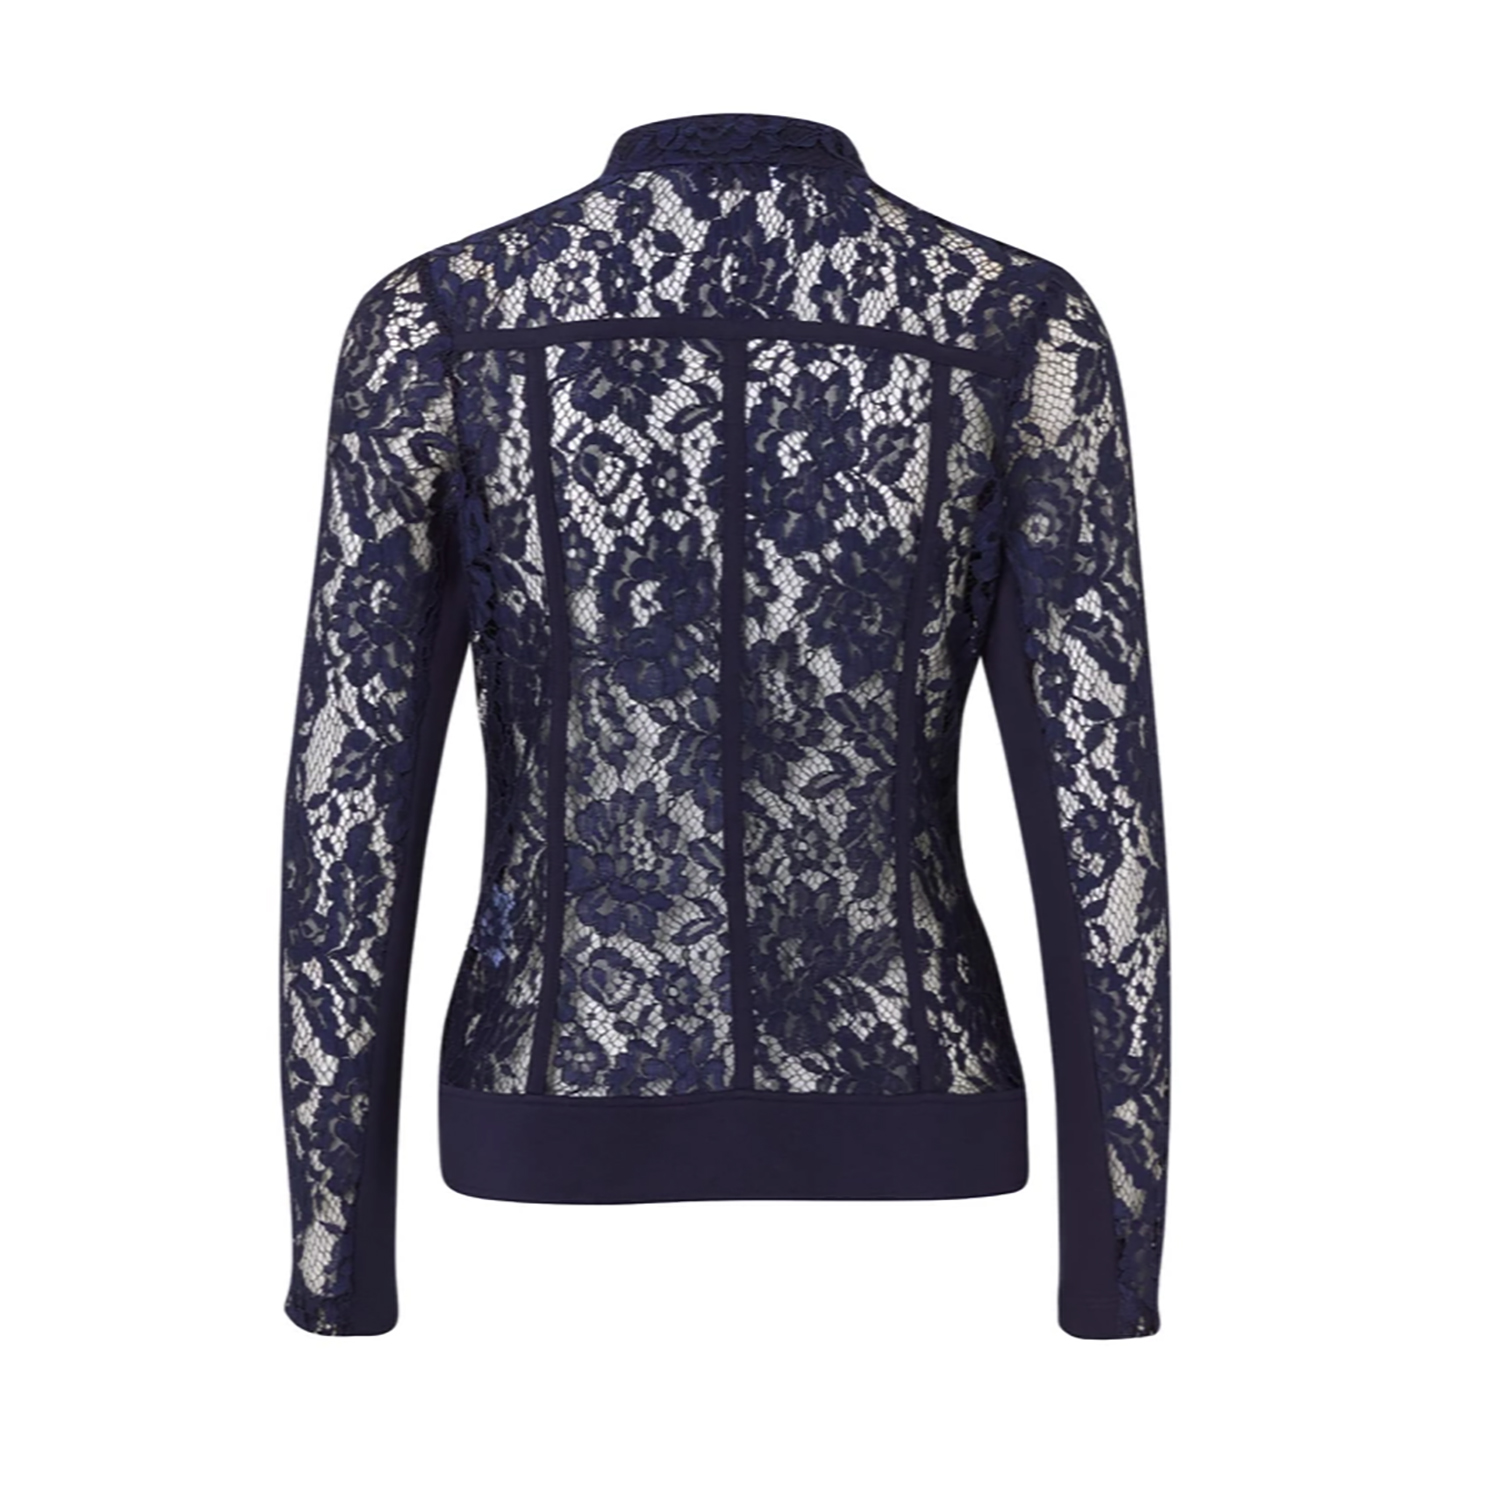 JUST WHITE Jacket with Lace Detailing in Navy – Obsessions